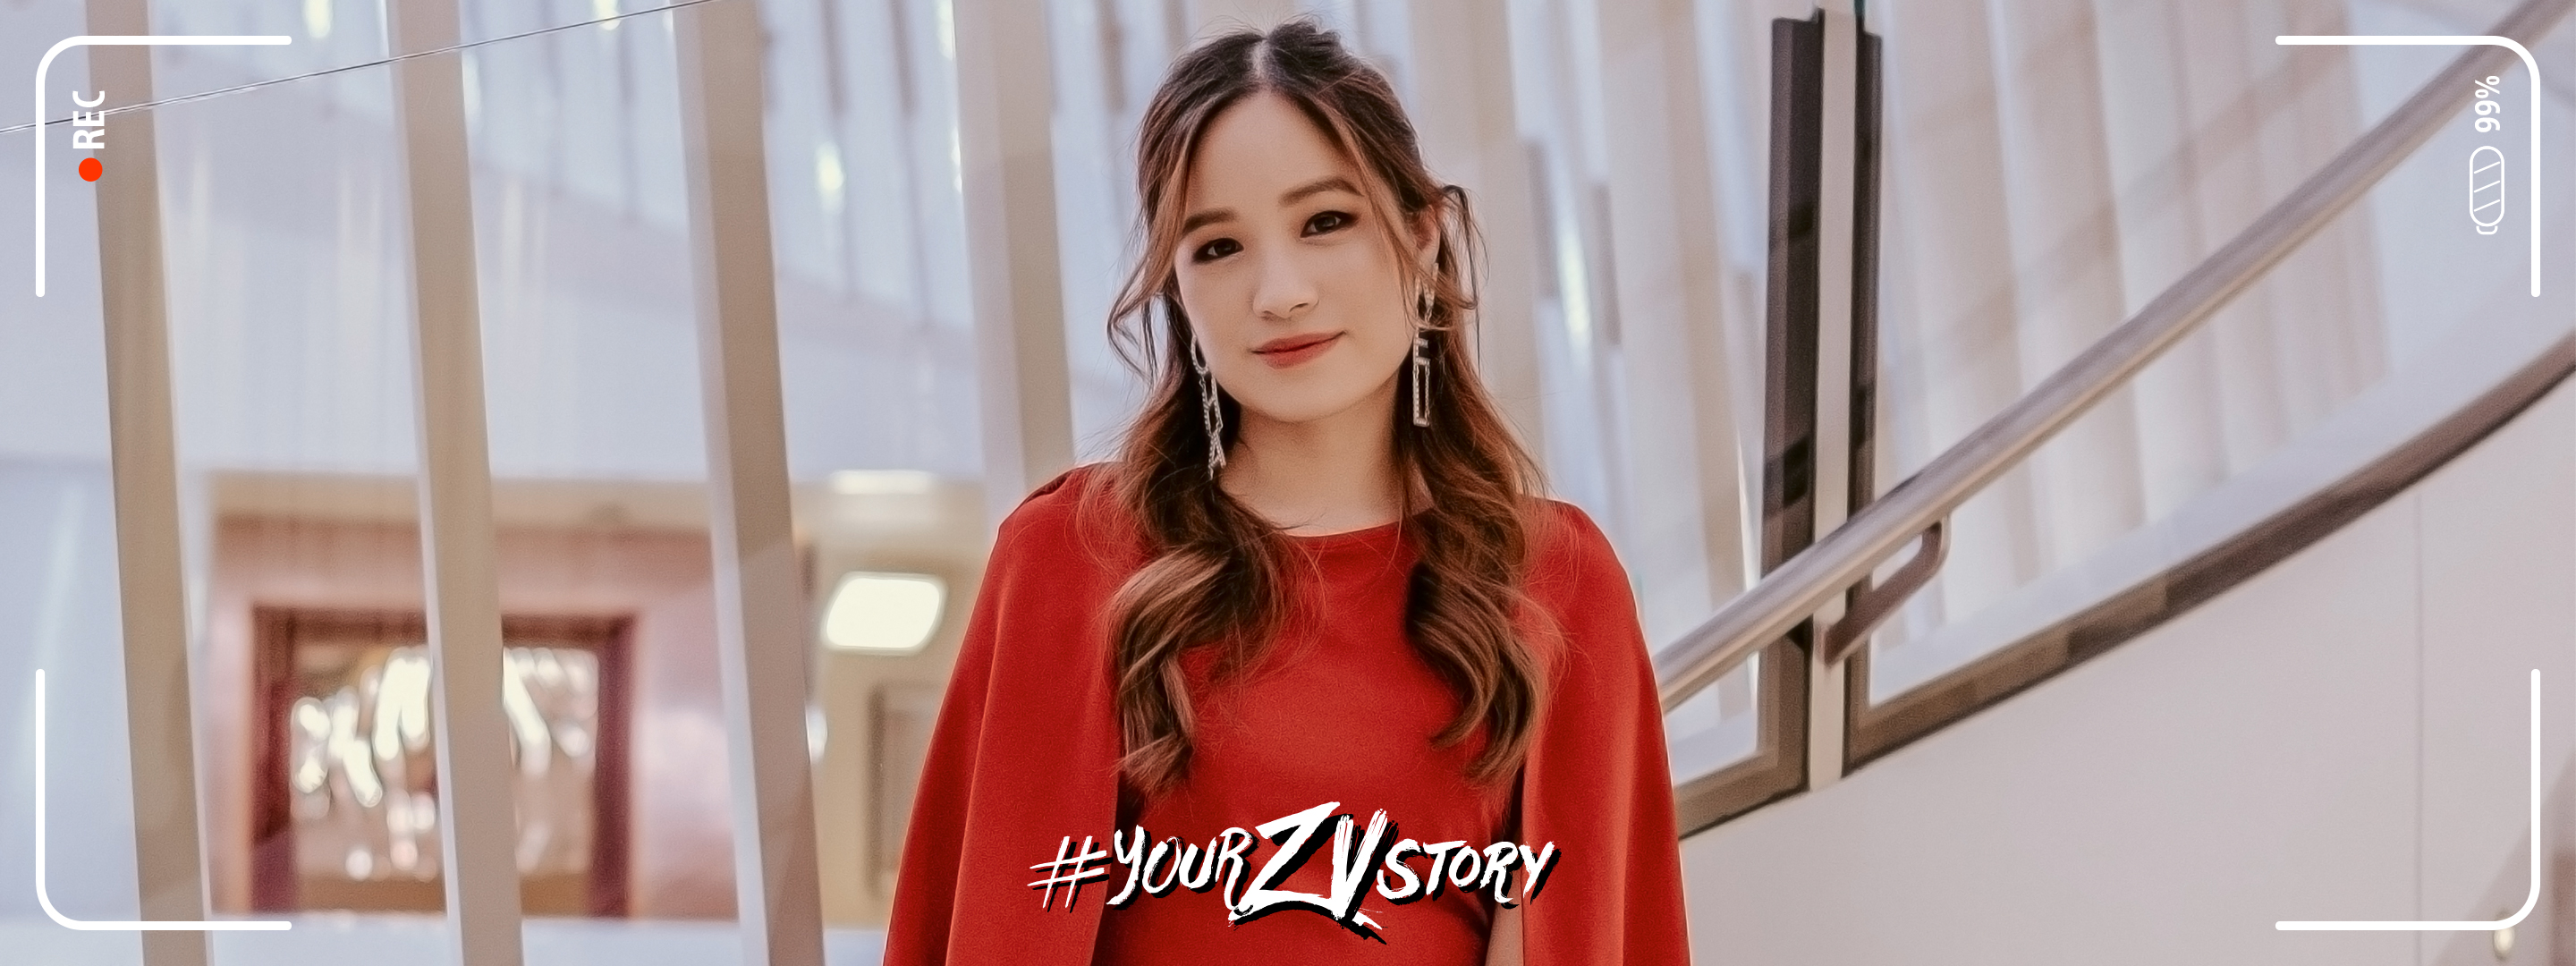 Kim Dao shares her unique world with YourZVStory